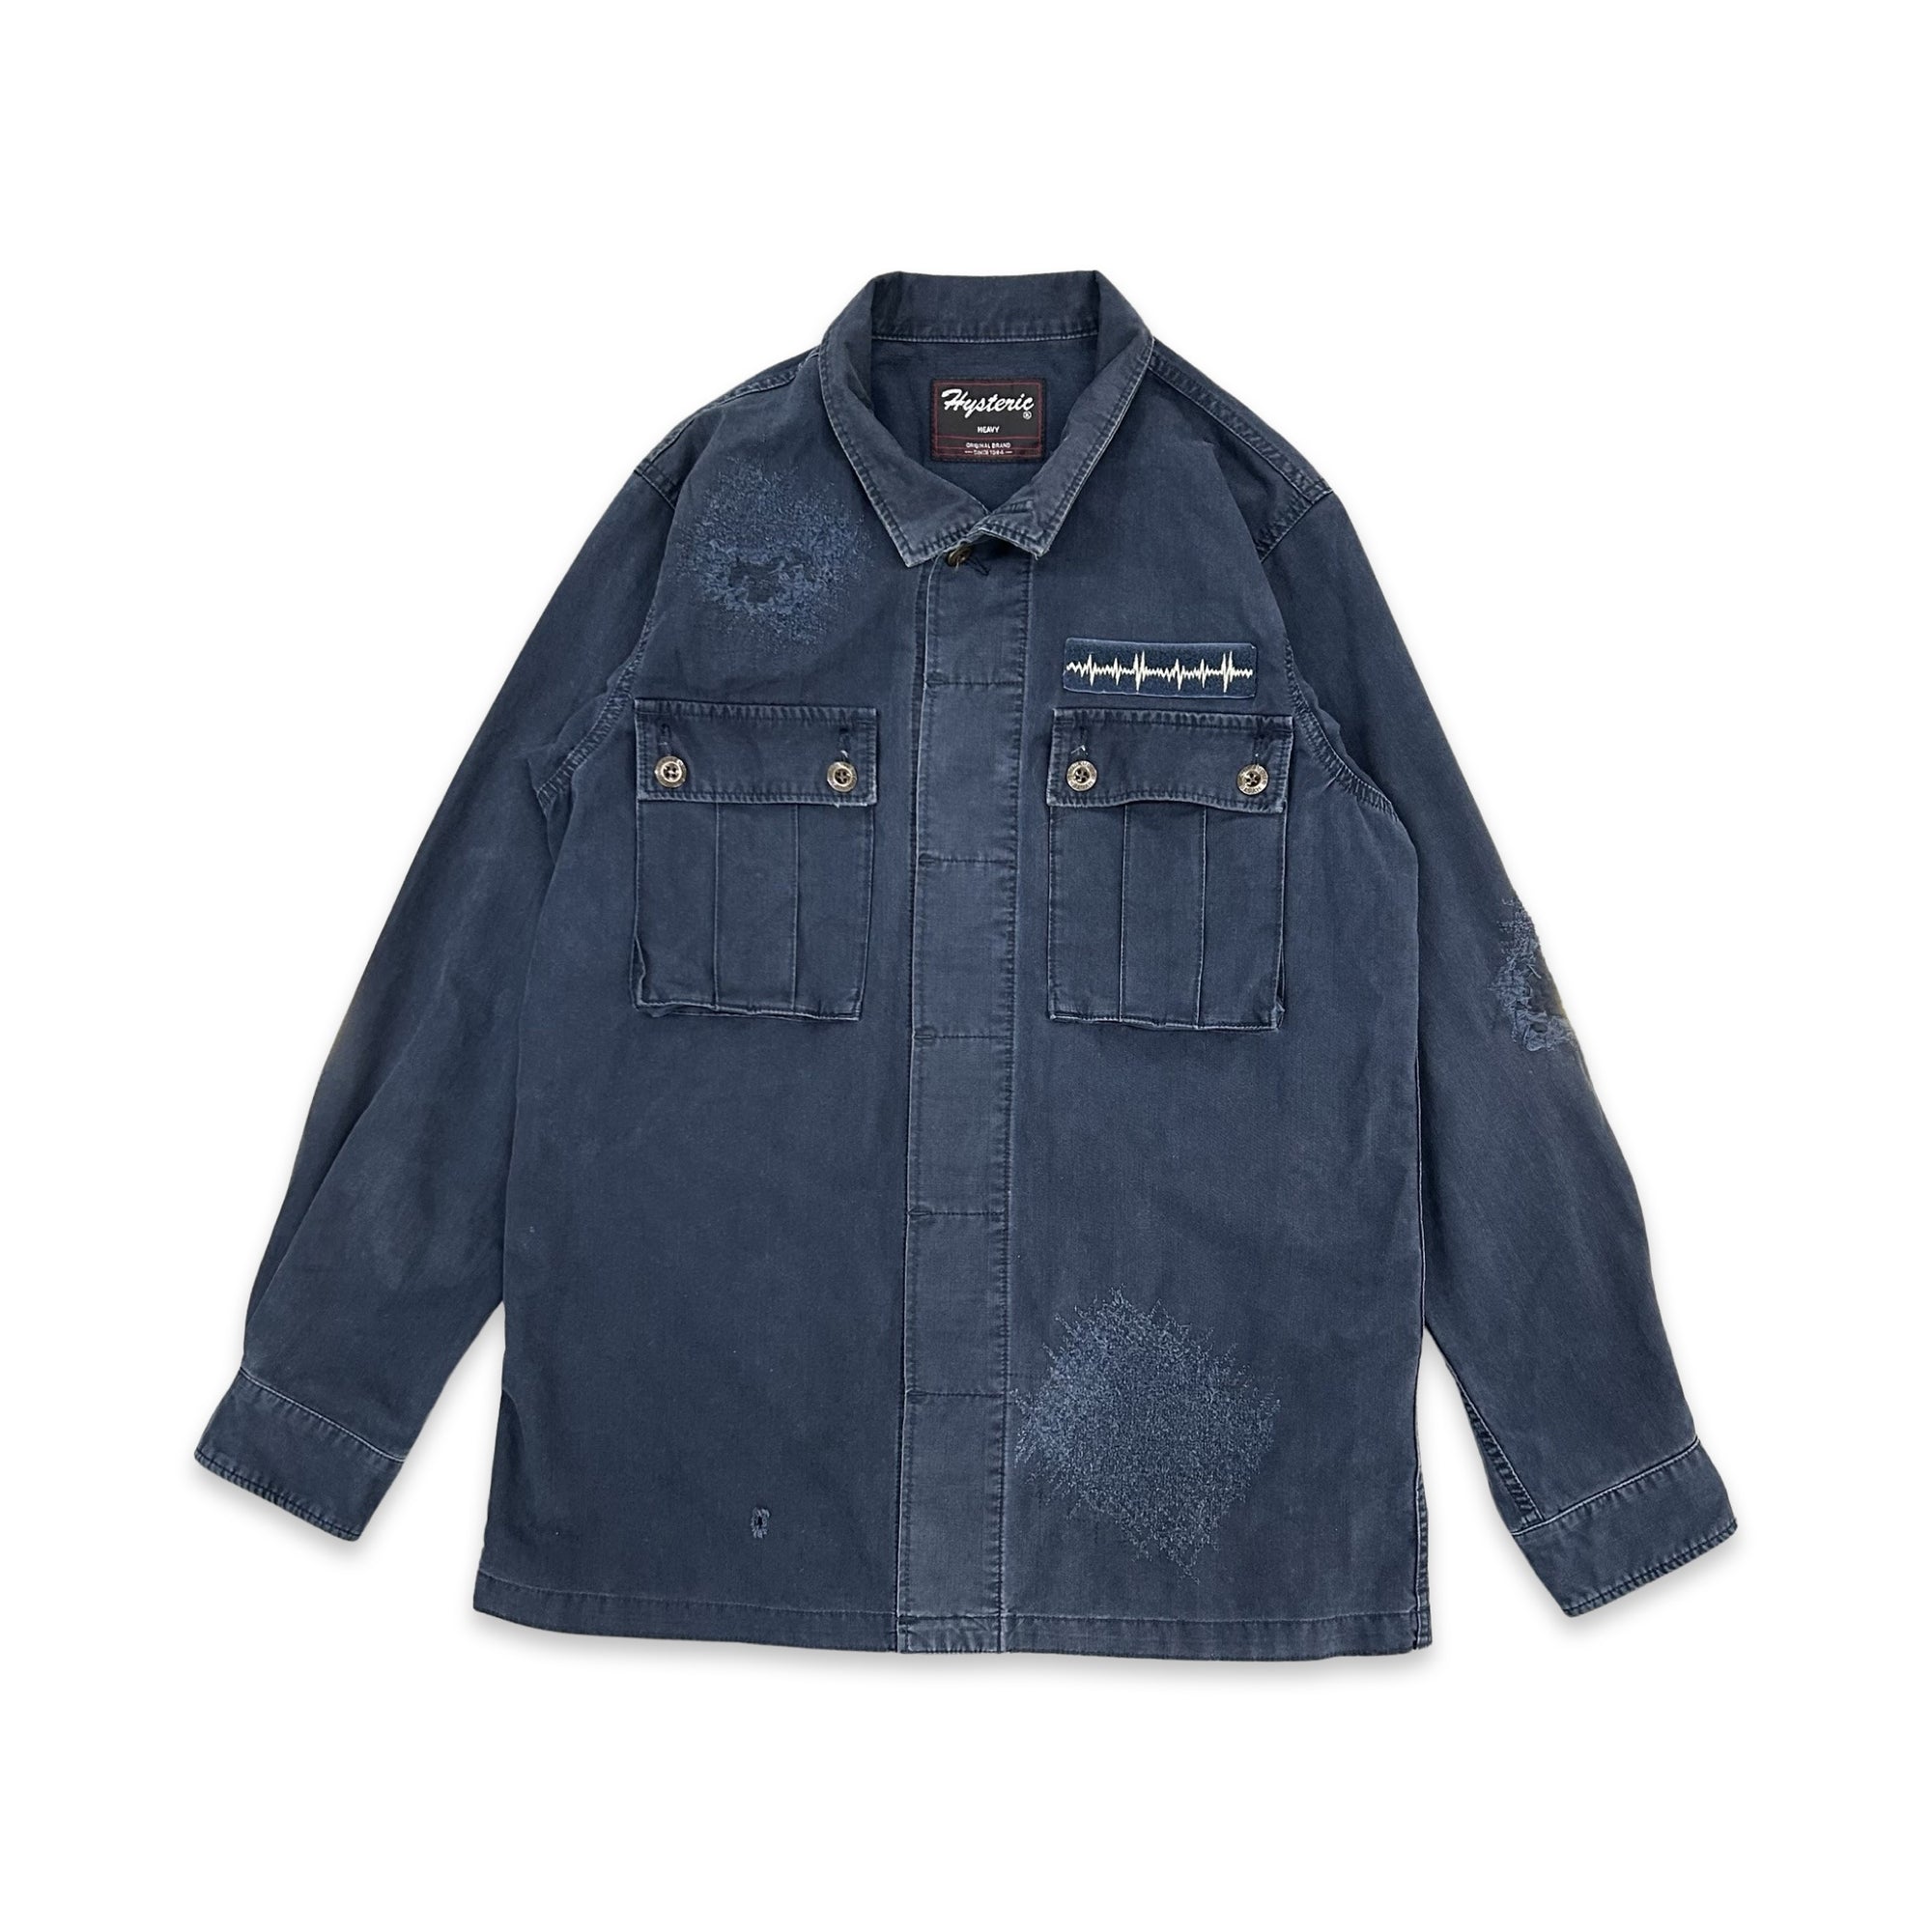 HYSTERIC GLAMOUR ELECTRONIC MEDITATION M65 ‘NAVY’